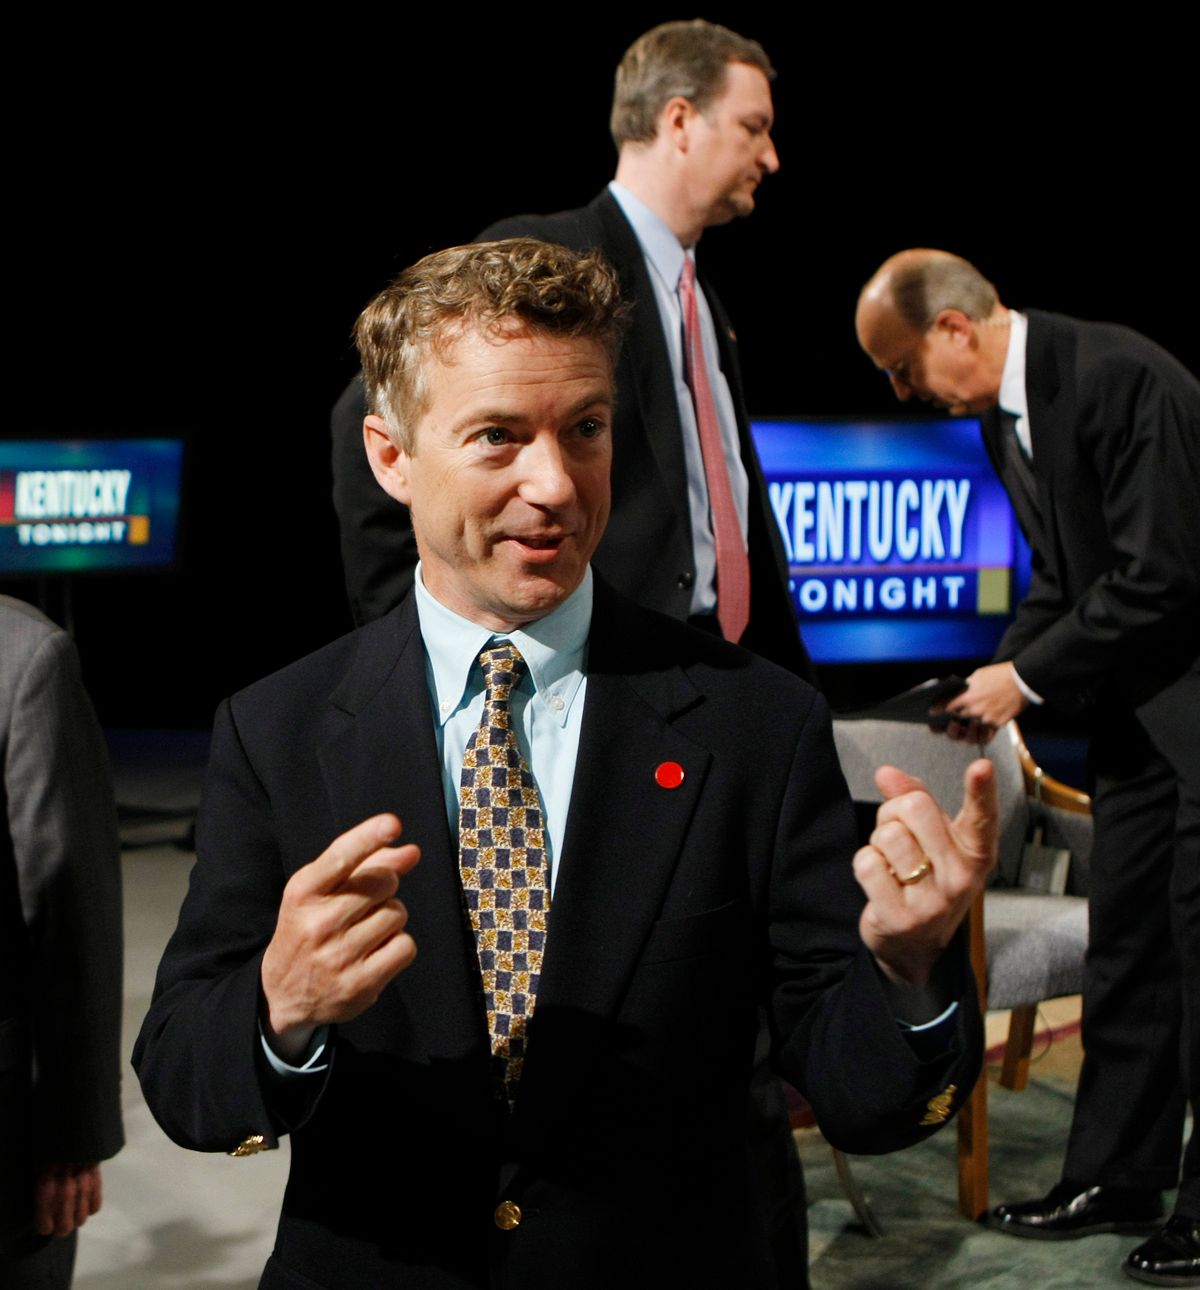 Republican U.S. Senate candidate Rand Paul talks with a person in the foreground as opponent C.M. "Trey" Grayson, top, and host Bill Goodman await the beginning of a televised candidate forum in Lexington, Ky., Monday, May 10, 2010.  (AP Photo/Ed Reinke)      (Ed Reinke)